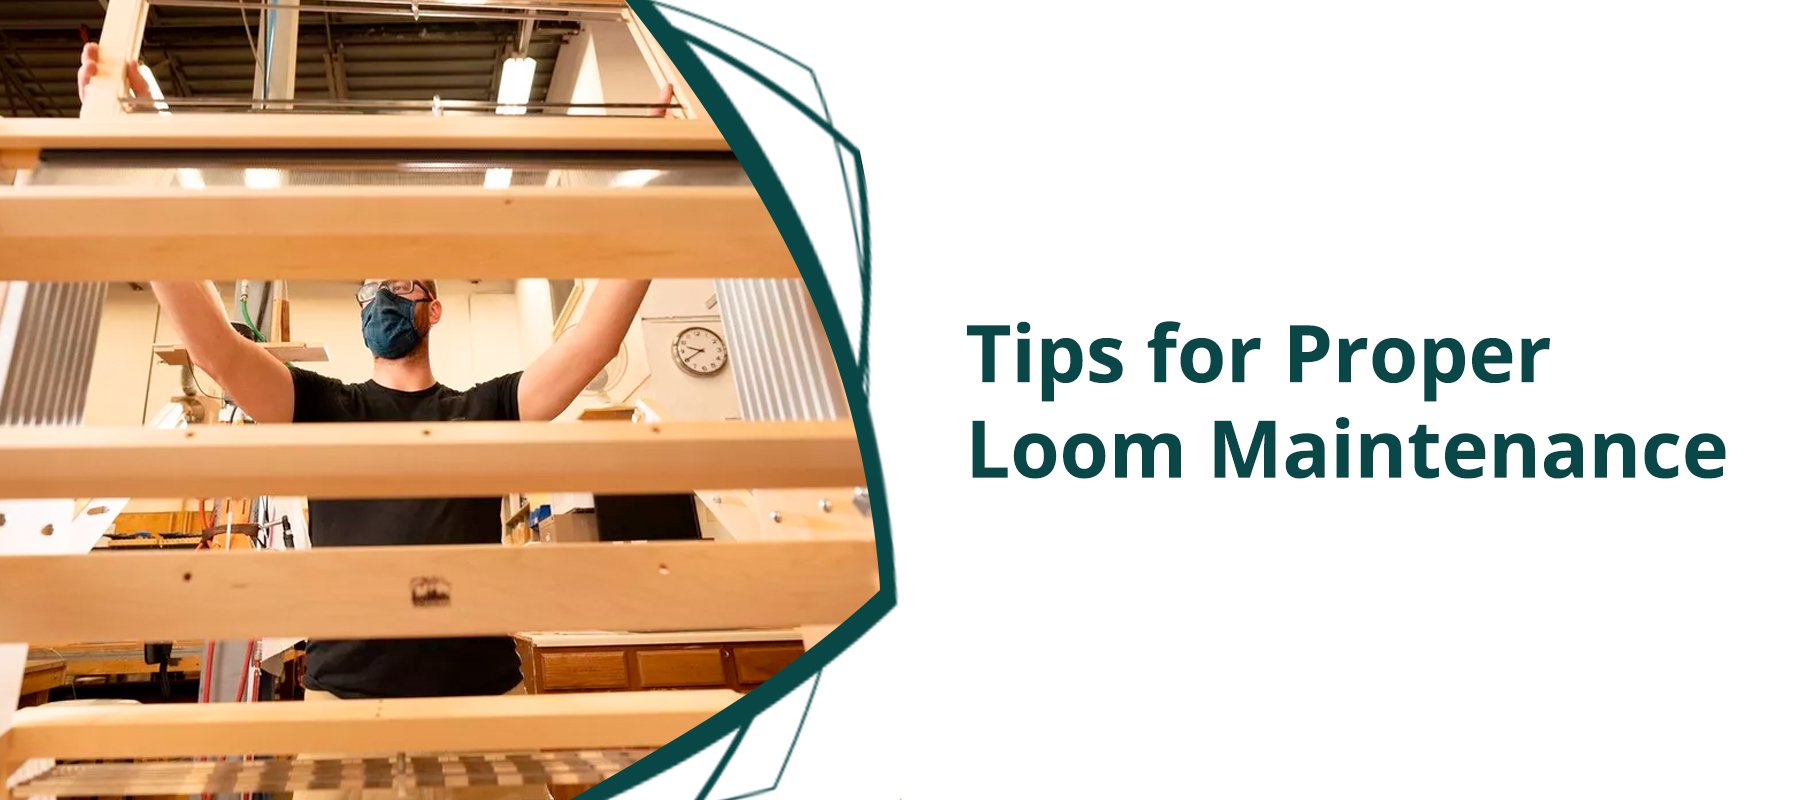 Tips for Proper Loom Maintenance: Keeping Your Equipment in Top Shape